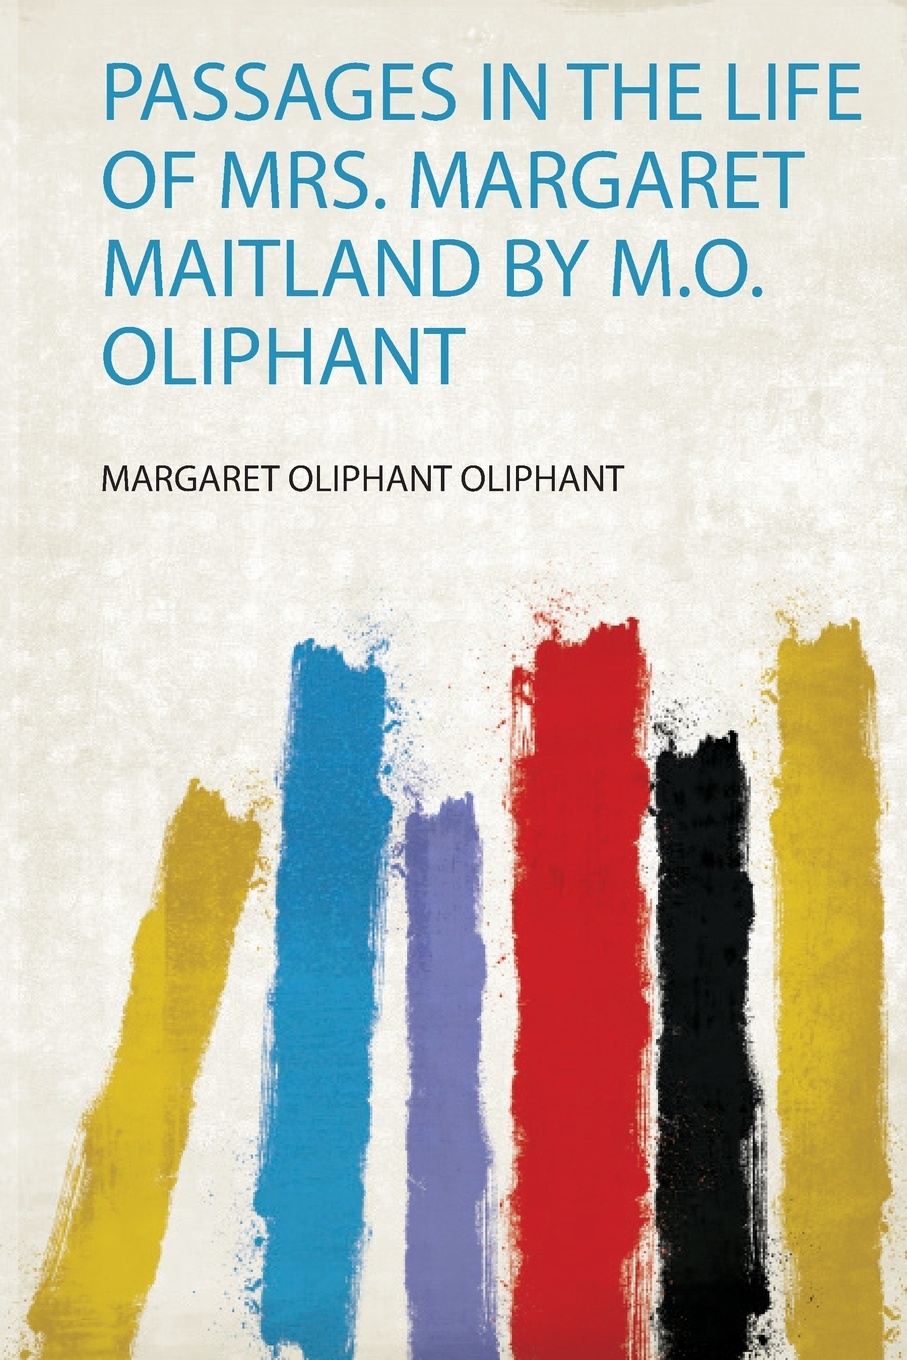 Passages in the Life of Mrs. Margaret Maitland by M.O. Oliphant